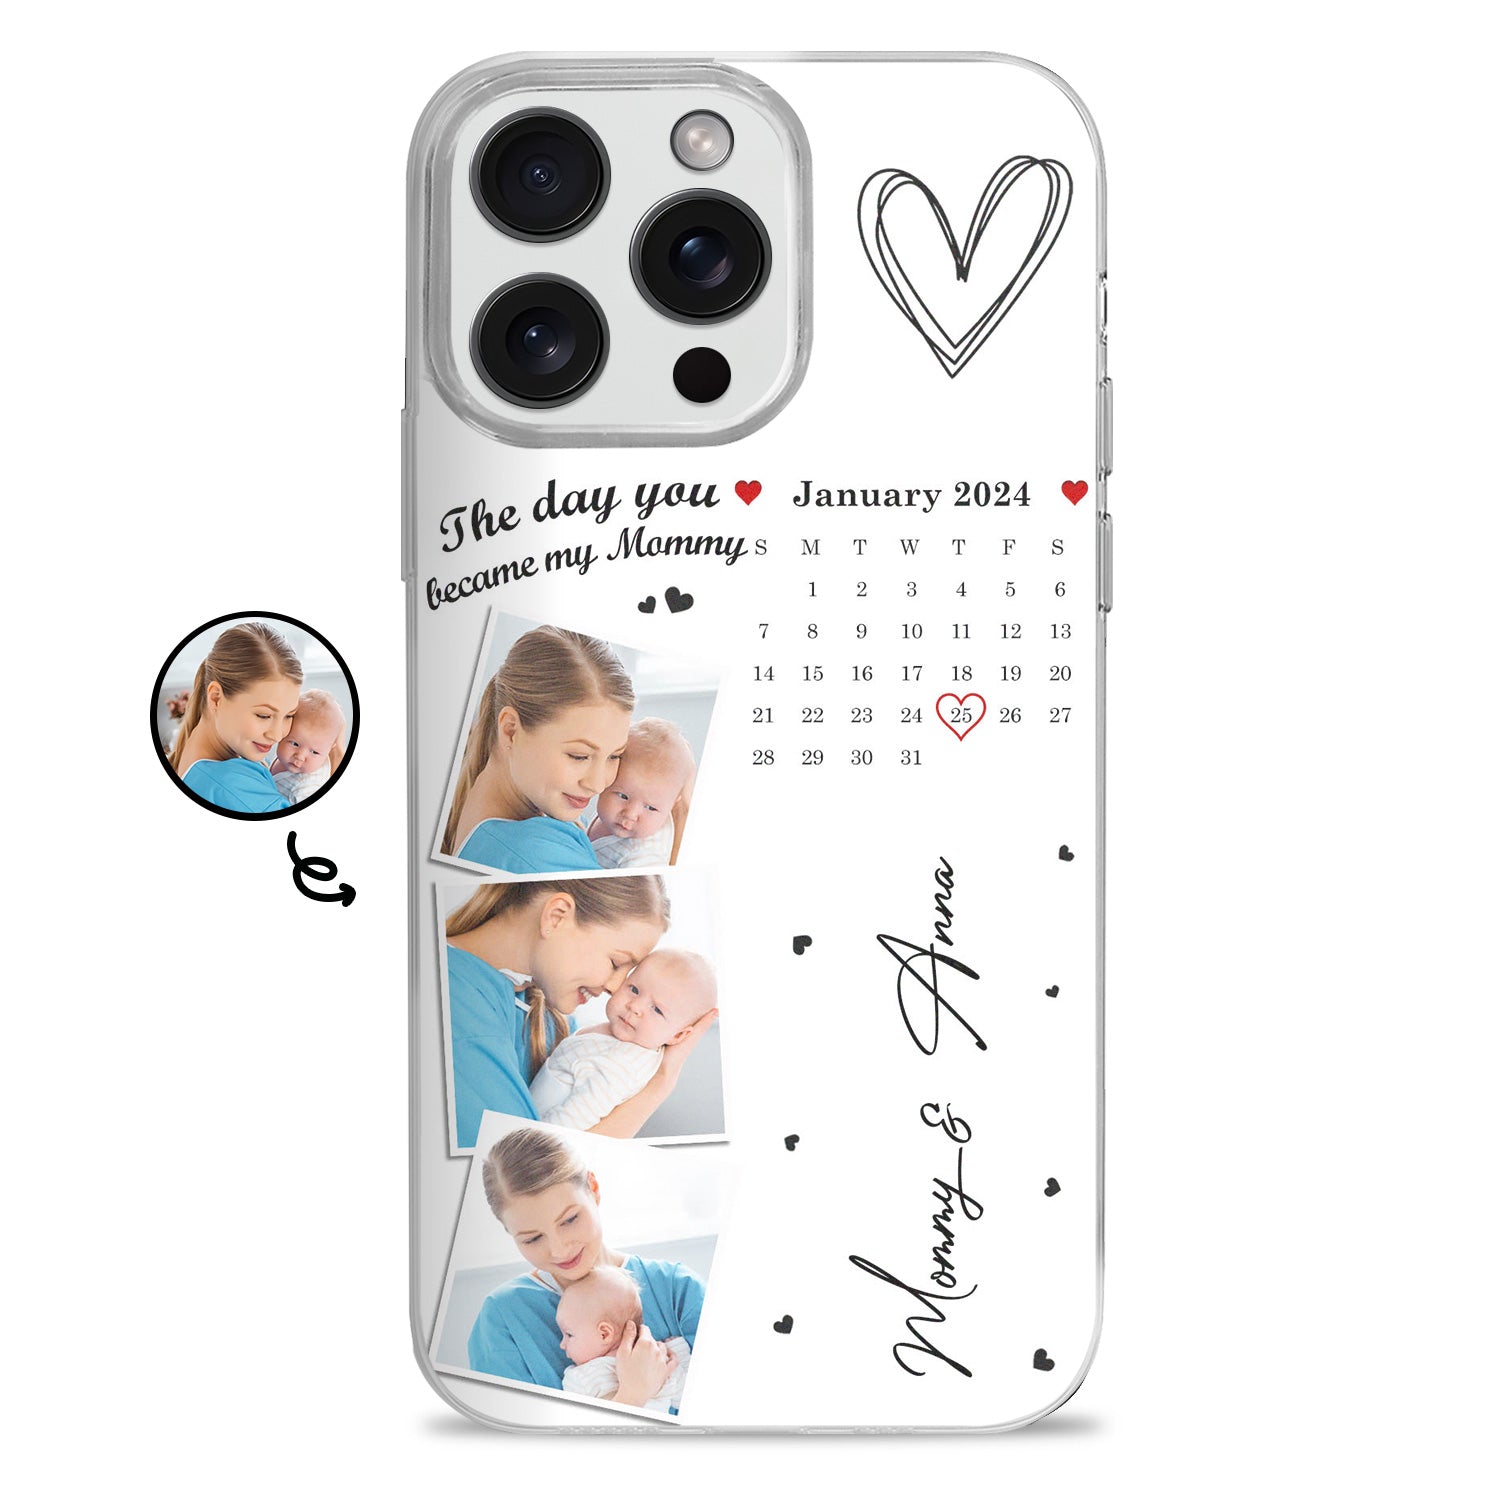 Custom Photo Calendar The Day You Became My Mommy - Gift For Mother - Personalized Clear Phone Case